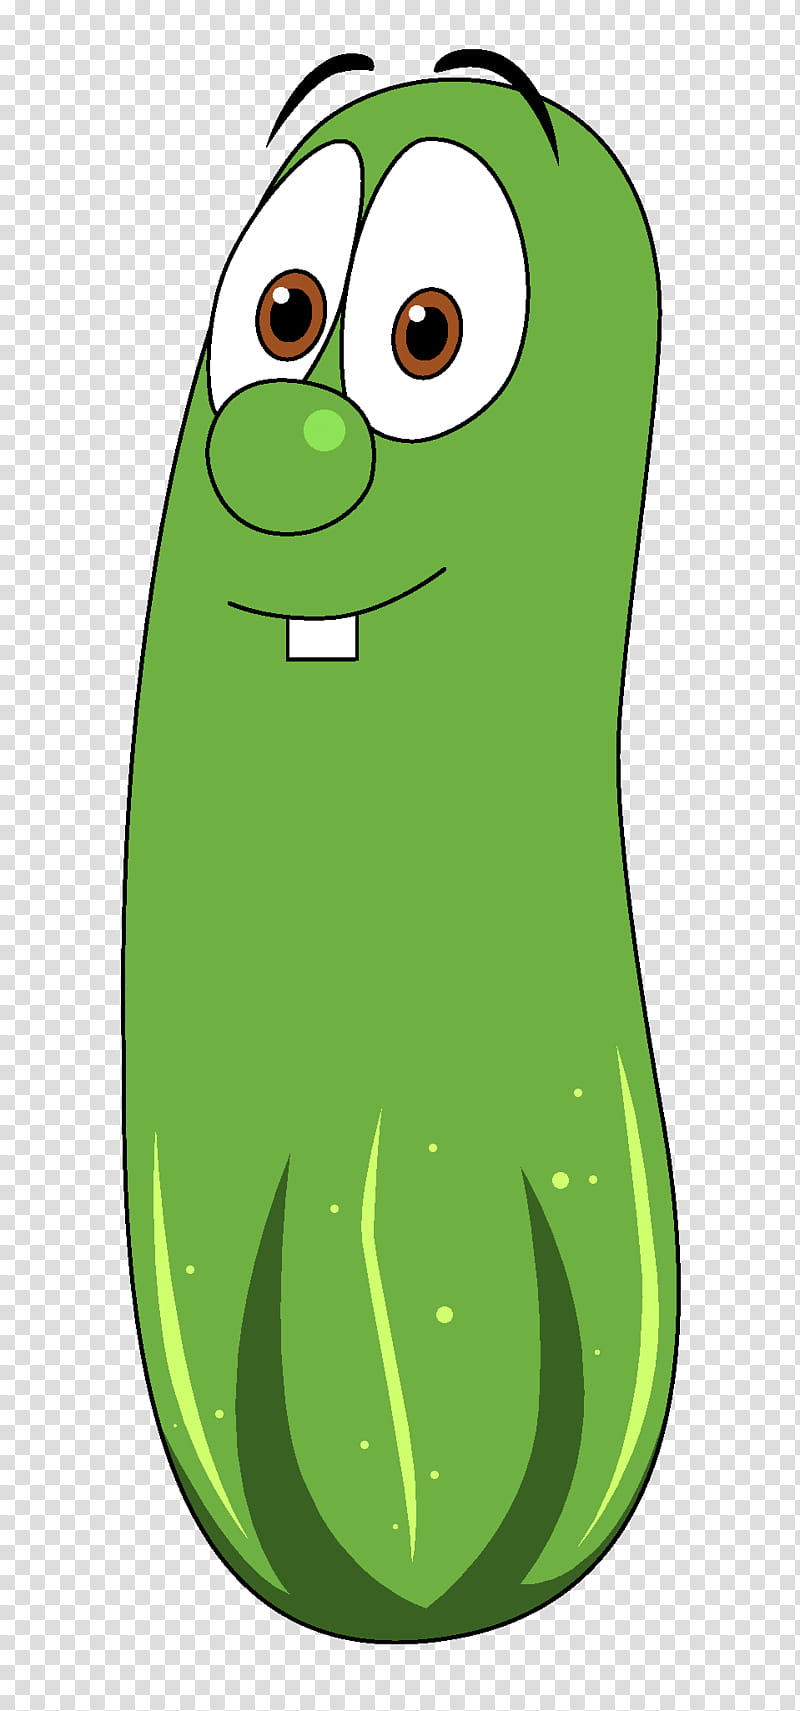 VTitH Larry the Cucumber Dress Up Base , green cartoon character illustration transparent background PNG clipart